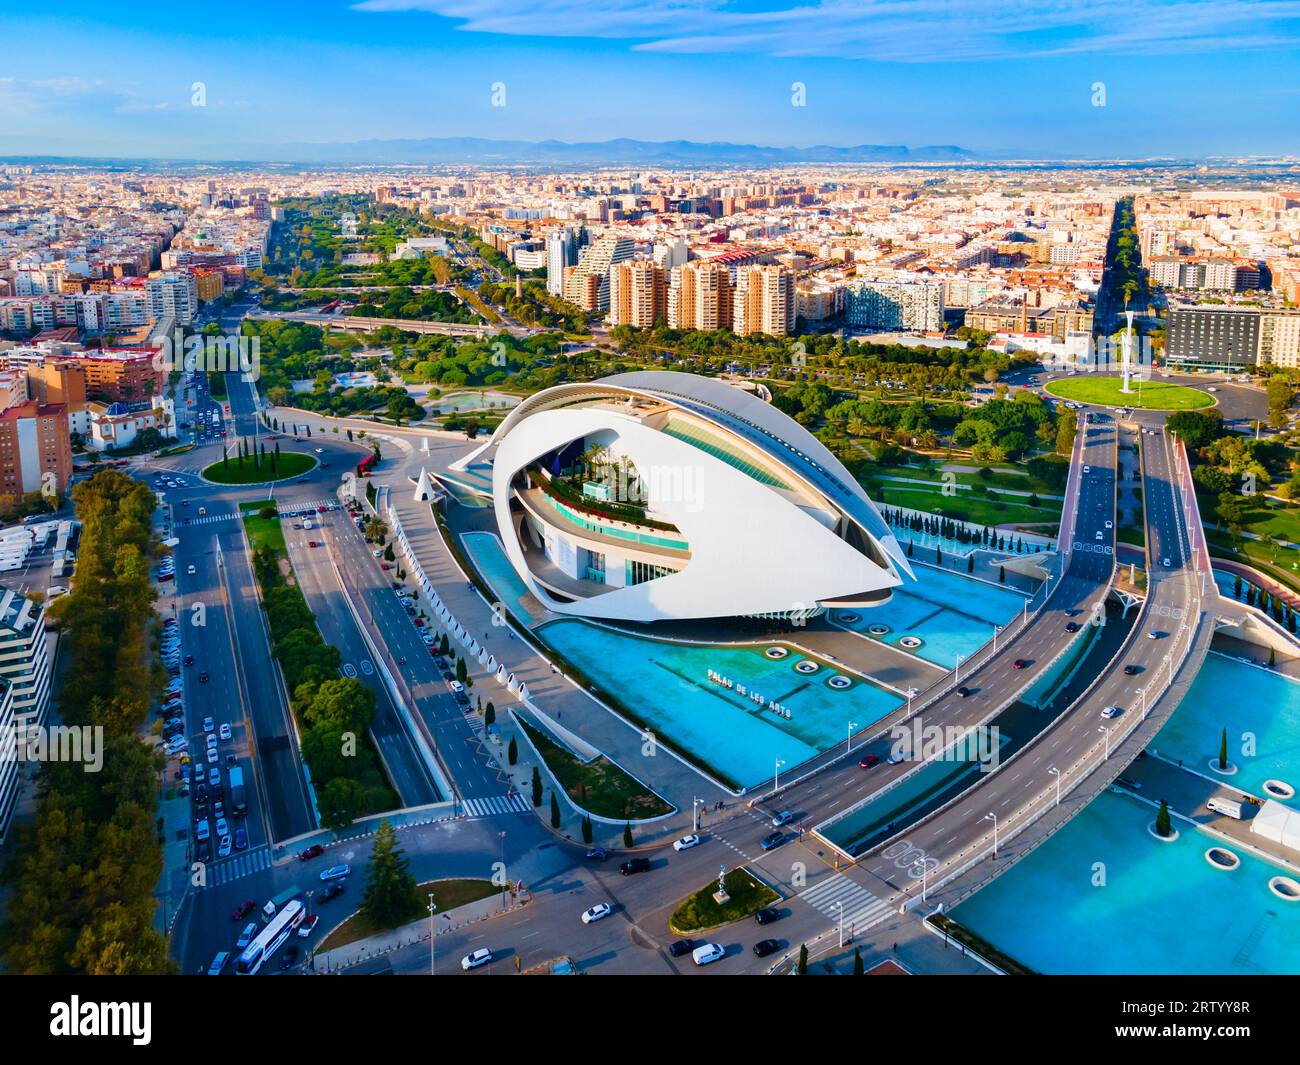 Valencia, Spain - October 15, 2021: Palau de les Arts Reina Sofia or Queen Sofia Palace of the Arts is an opera house and arts centre by Santiago Cala Stock Photo